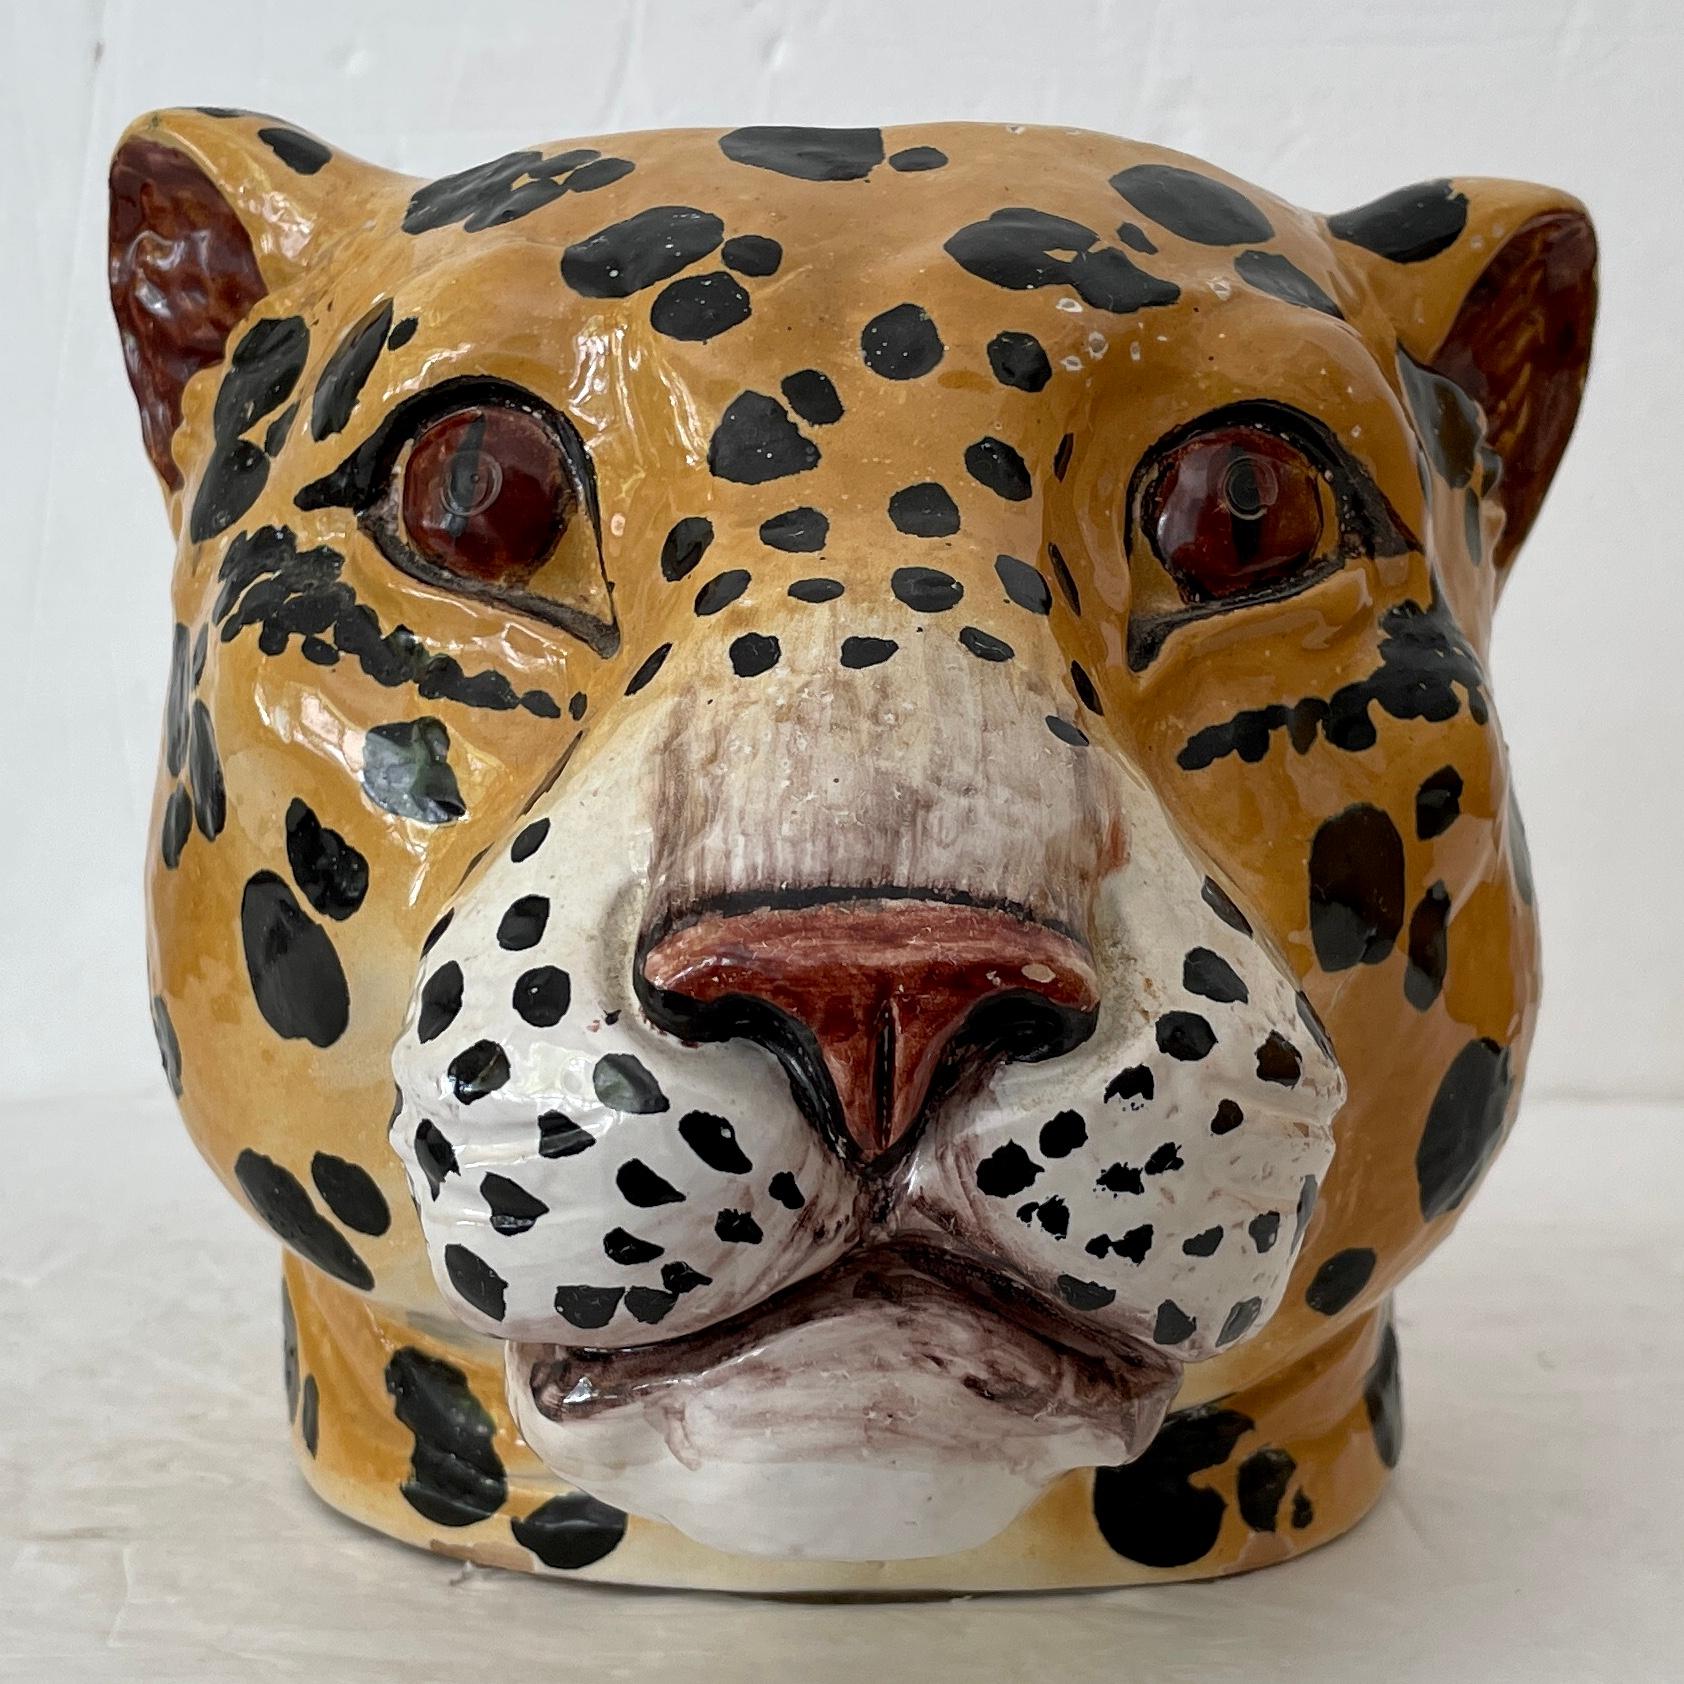 Fabulous Boho Chic ceramic cheetah cachepot made in Italy in the 1960s. Great addition to your Boho Chic inspired interiors and garden.